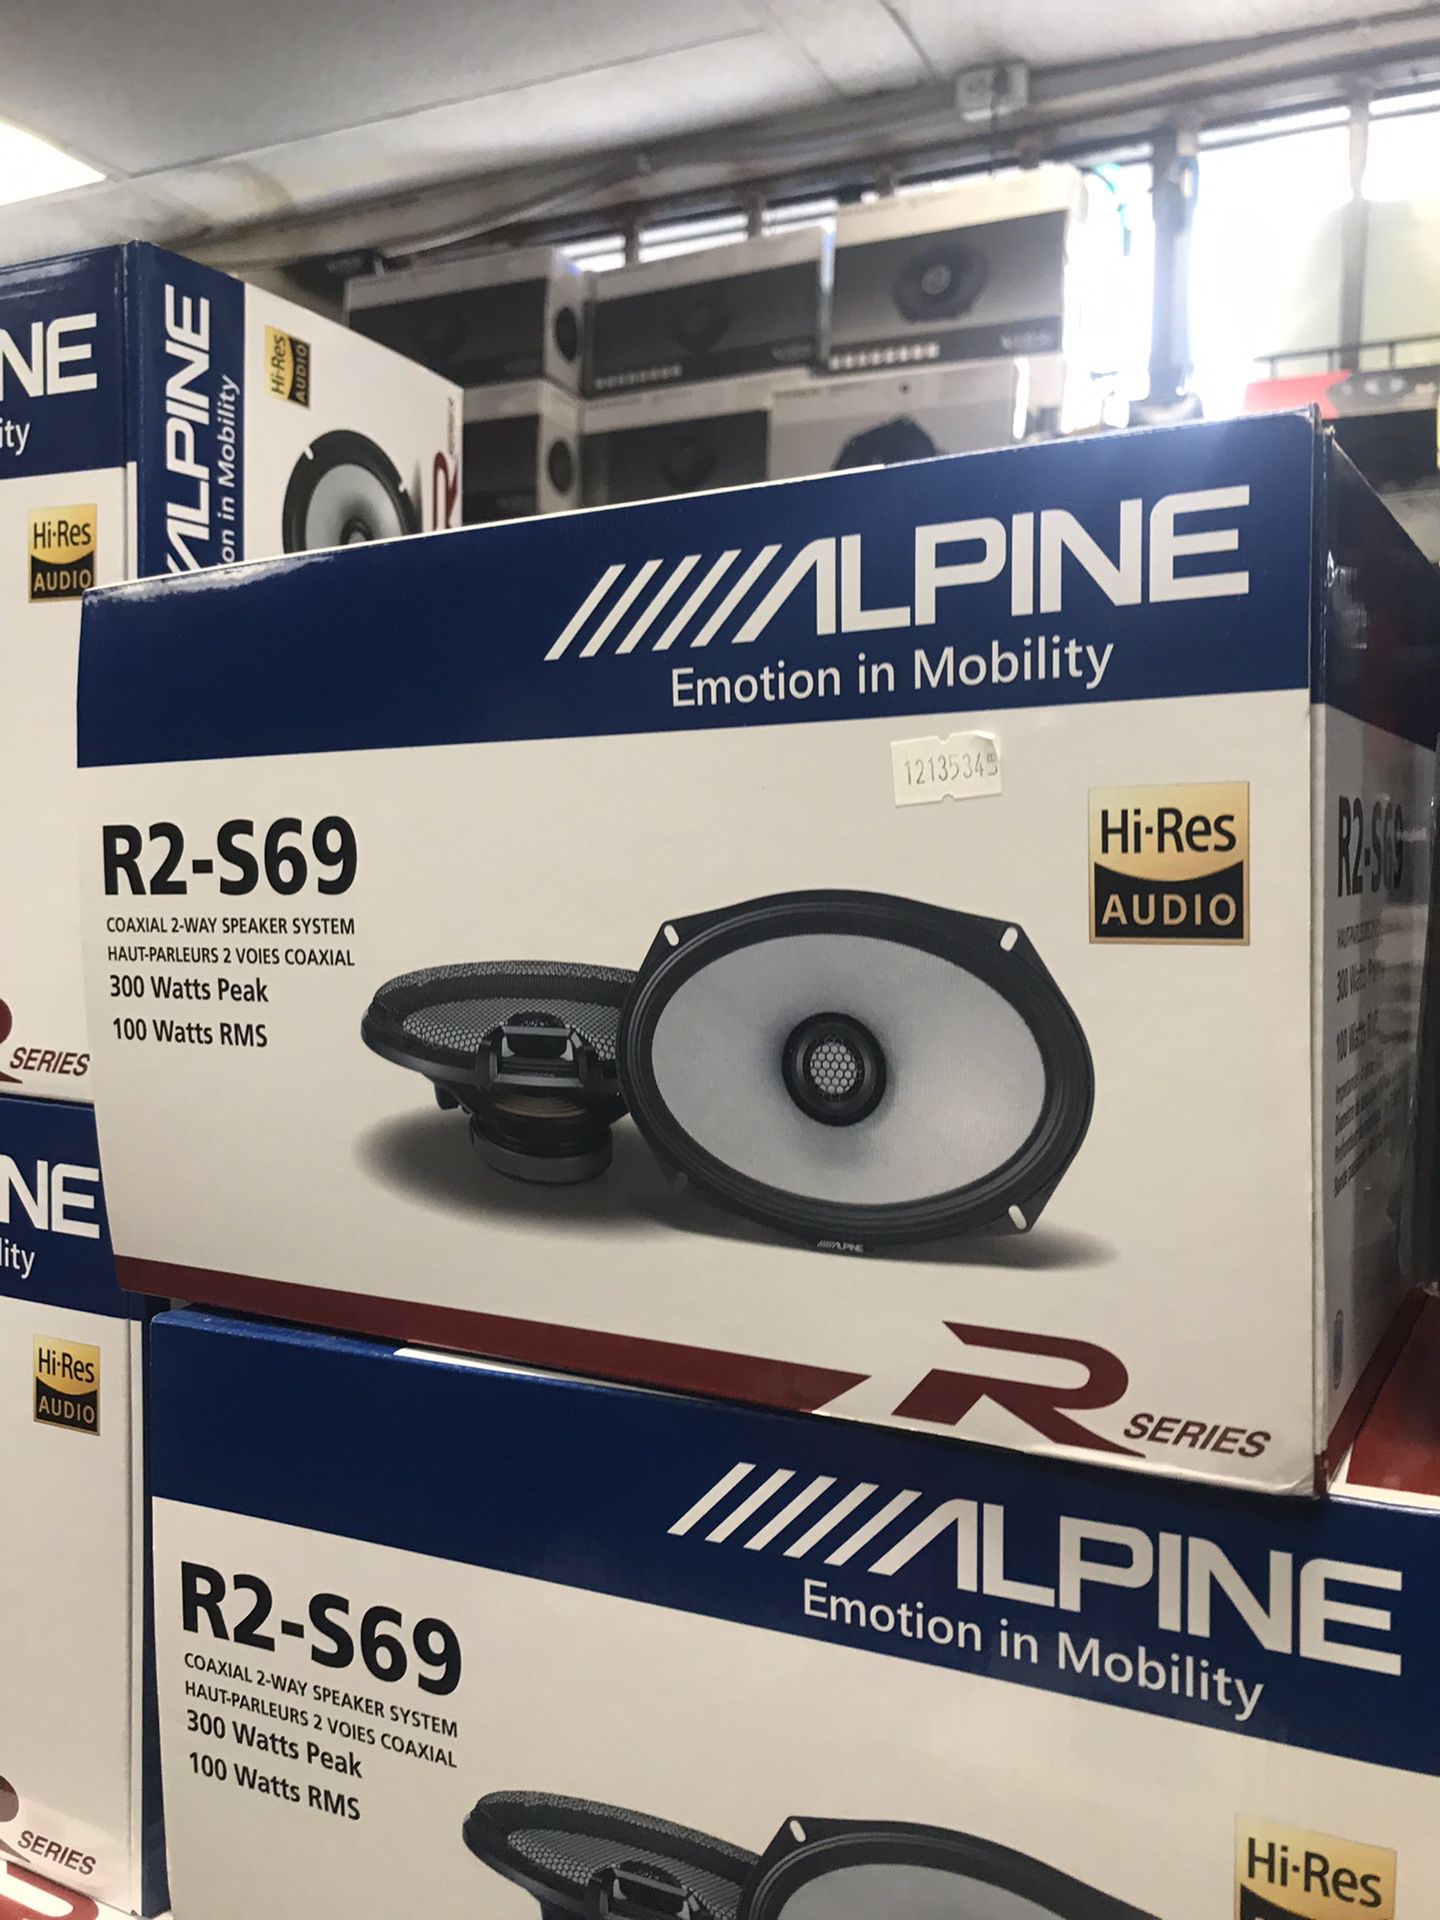 Alpine R2-s69 On Sale Today For 219.99